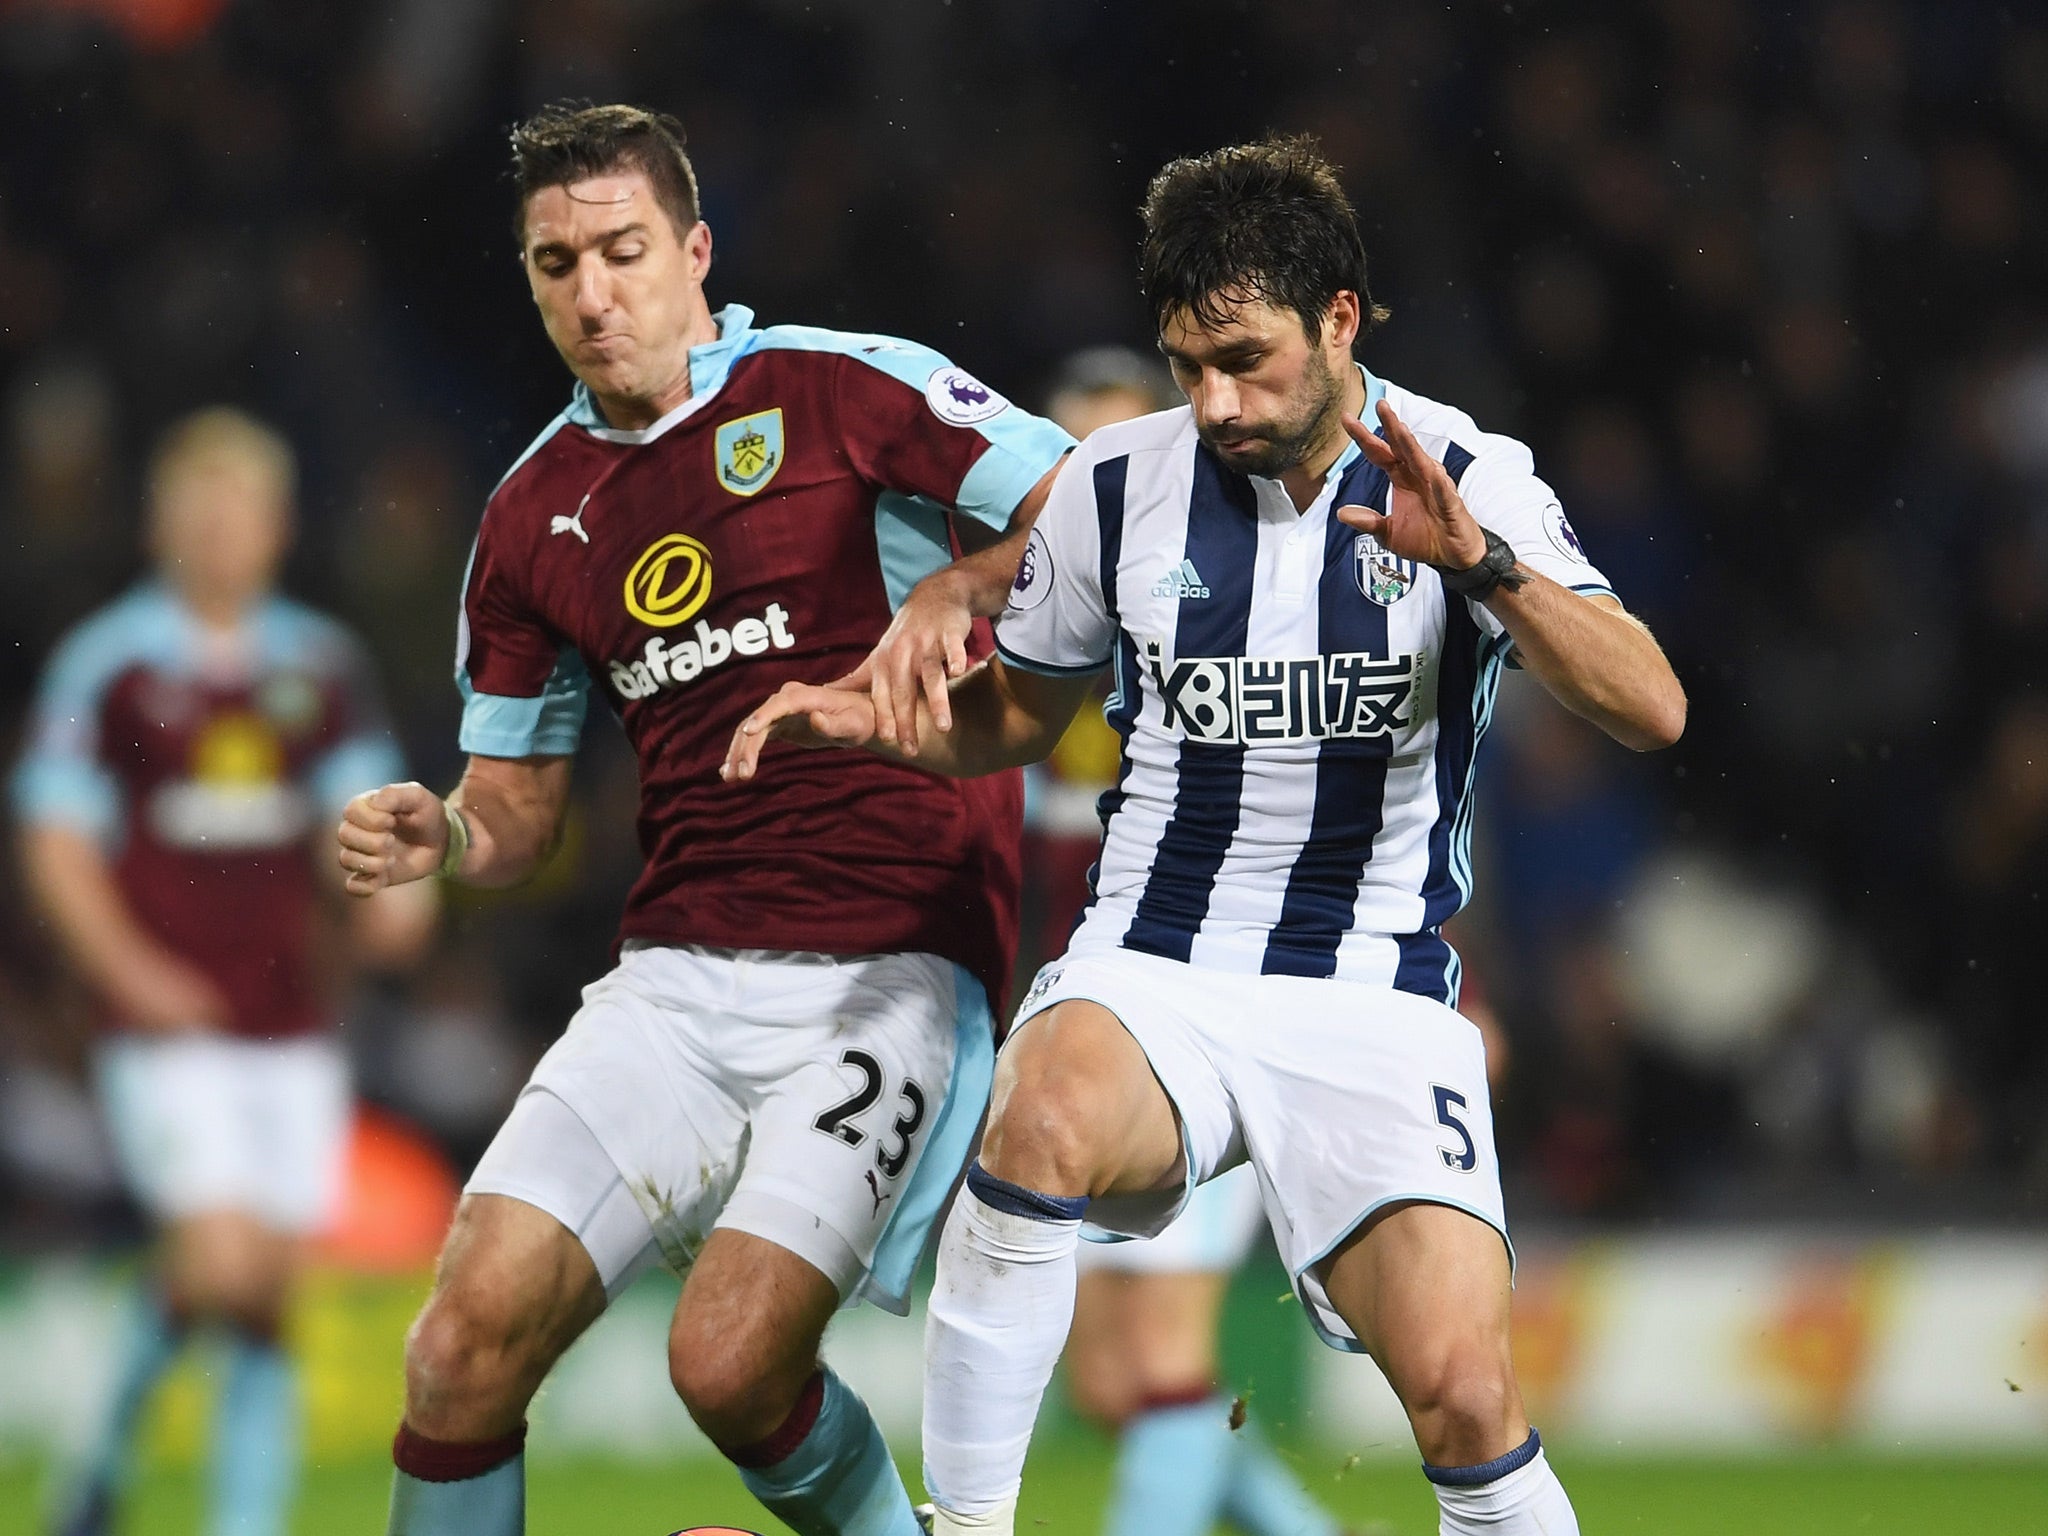 West Bromwich Albion recorded a comfortable win over Burnley earlier this season